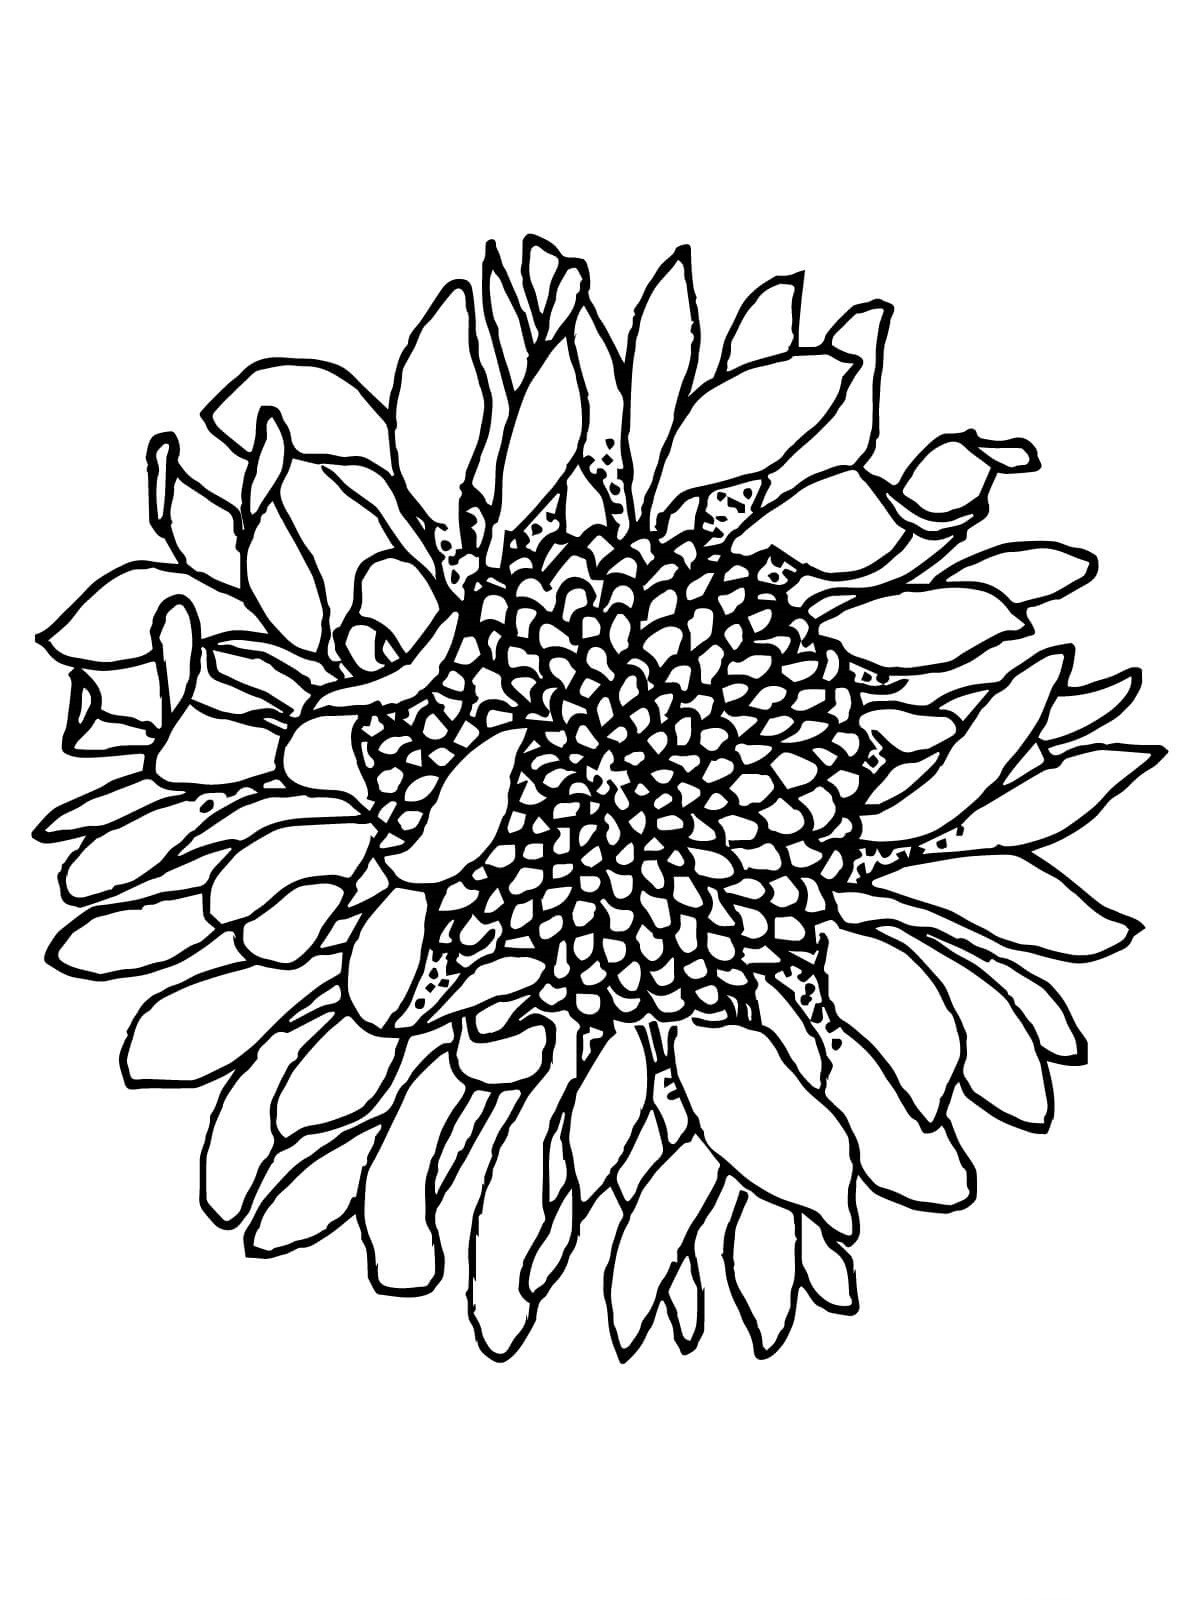 Sunflowers Withered Coloring Page - Free Printable Coloring Pages for Kids